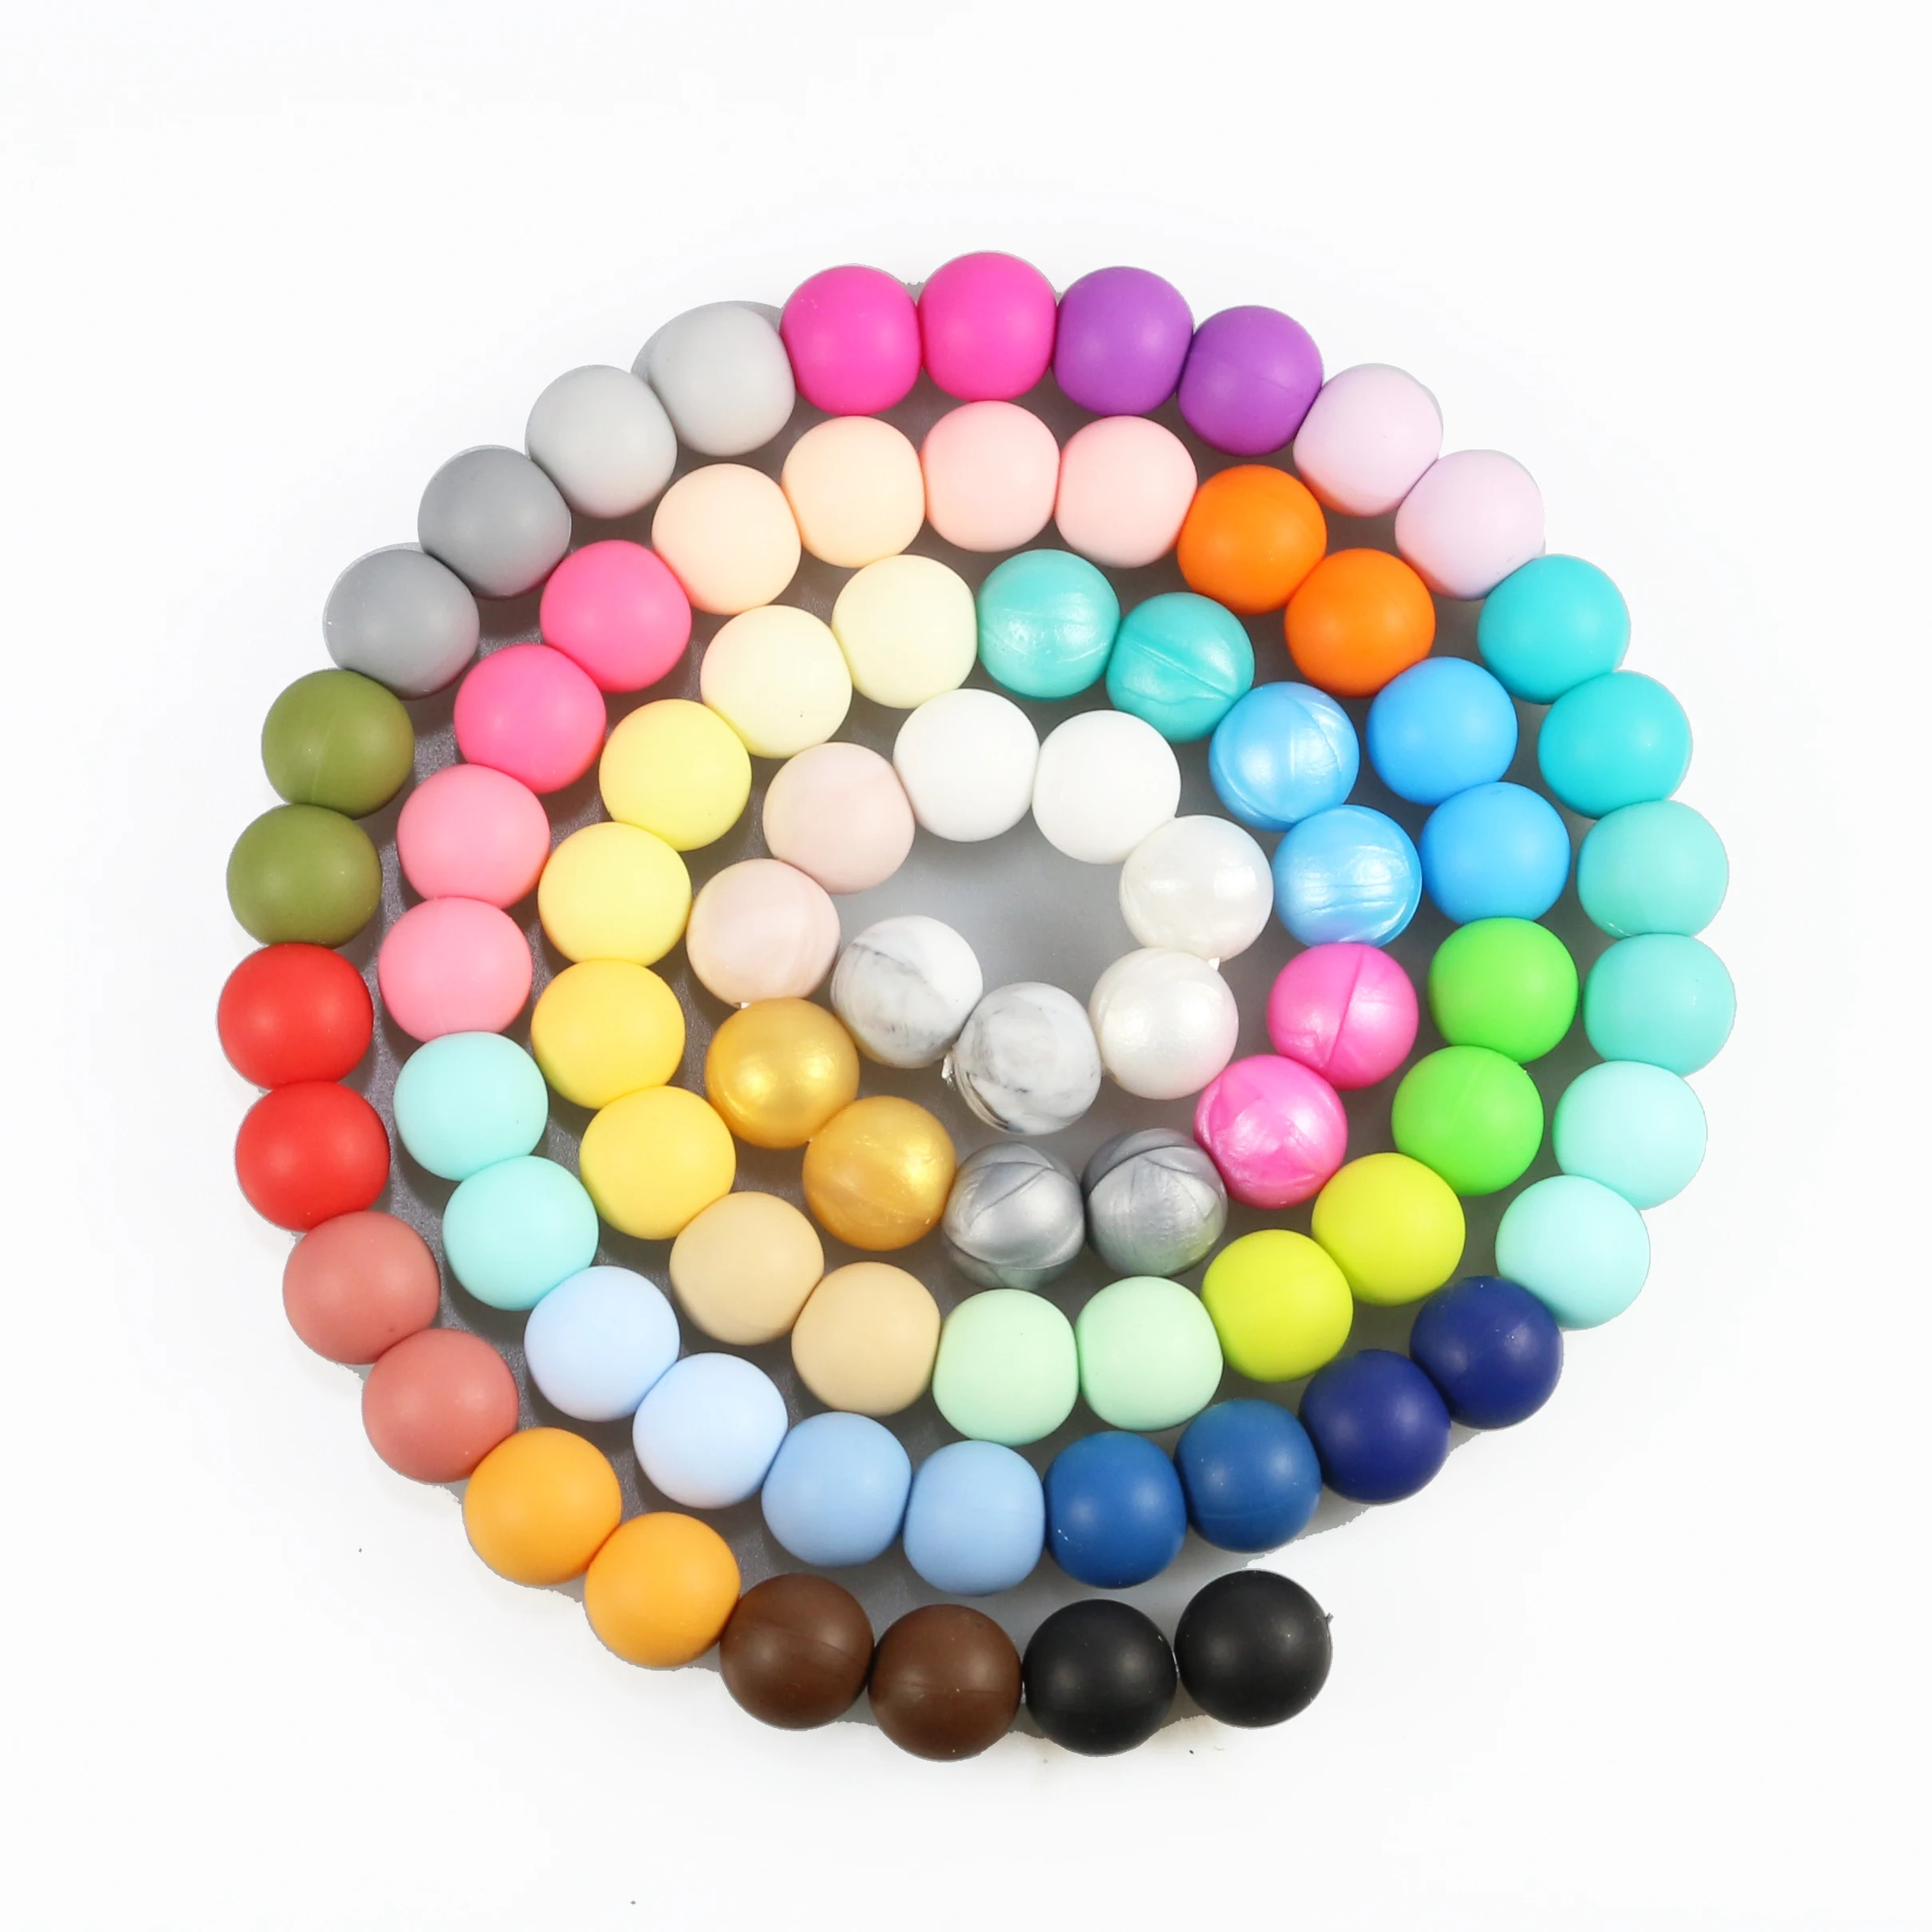 

Wholesale BPA Free Food Grade Baby teether Chew beads Soft Silicone Teething Beads For Jewelry Making silicone beads 12mm